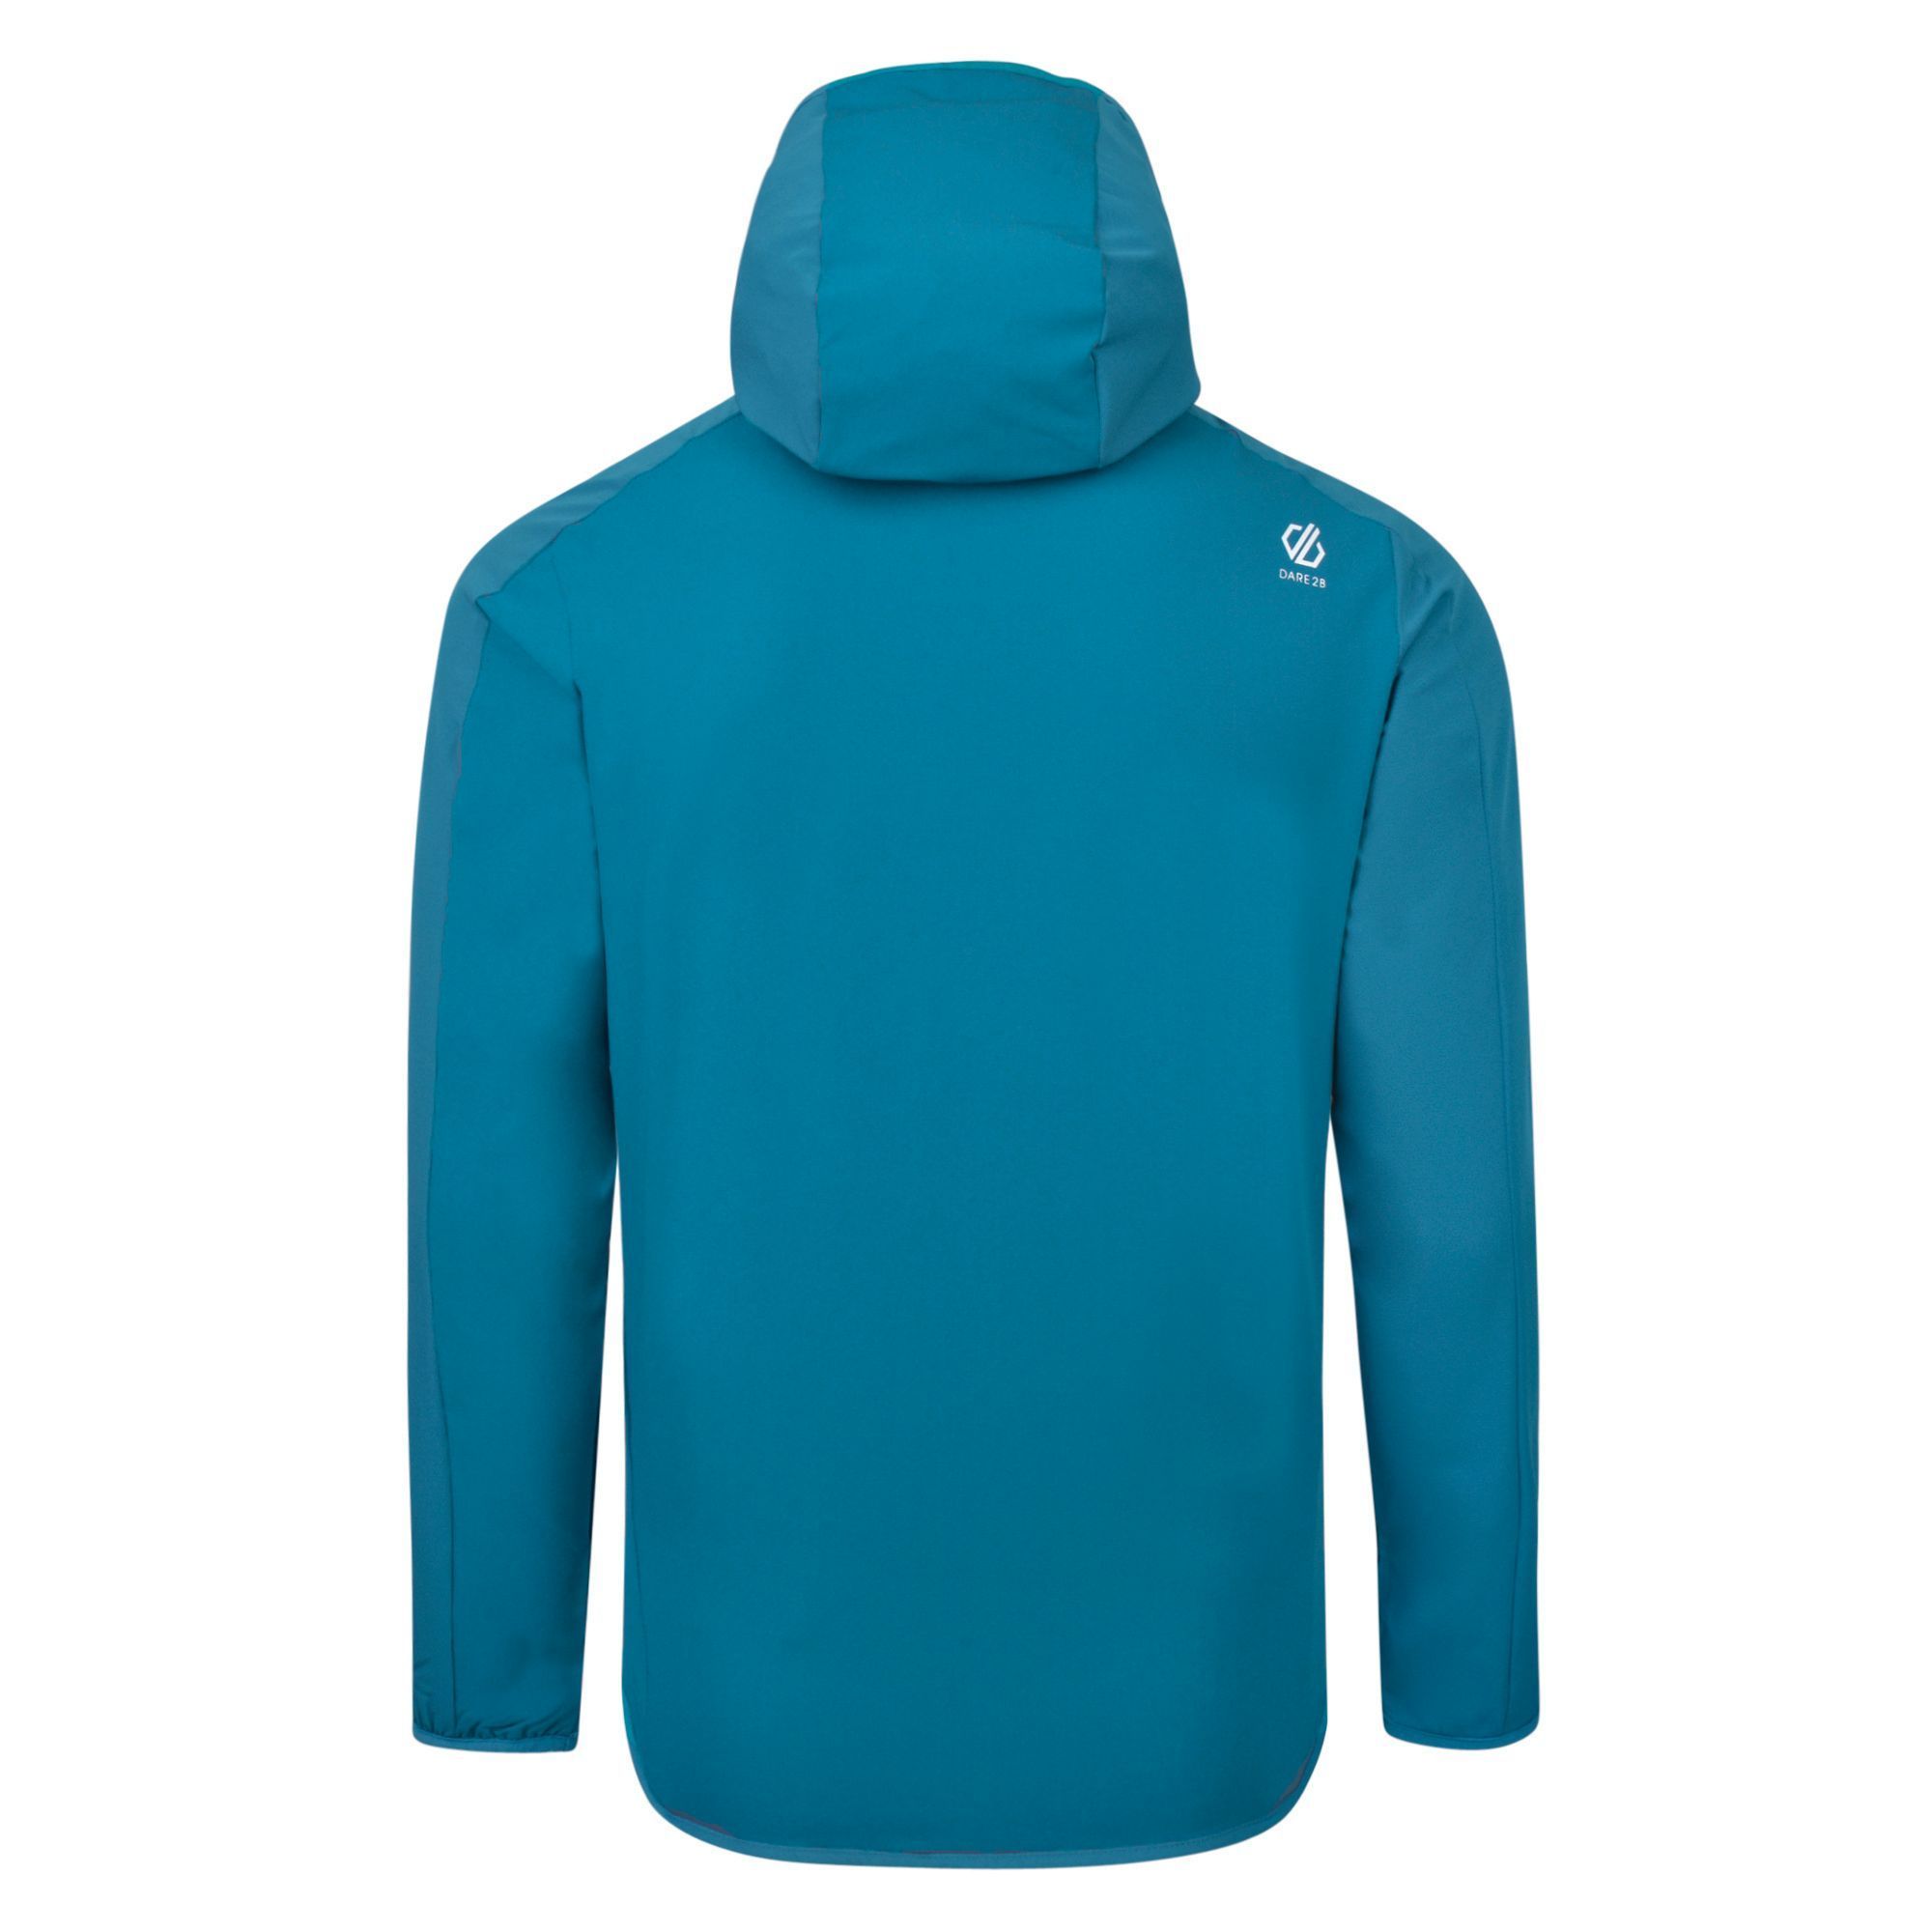 7% elastane, 3% cotton and 90% polyester. Ilus softshell with woven stretch polyester and textured panels. Water repellent finish. Grown on hood with elastication. Stretch binding to cuffs and hem. 2 x zipped lower pockets.